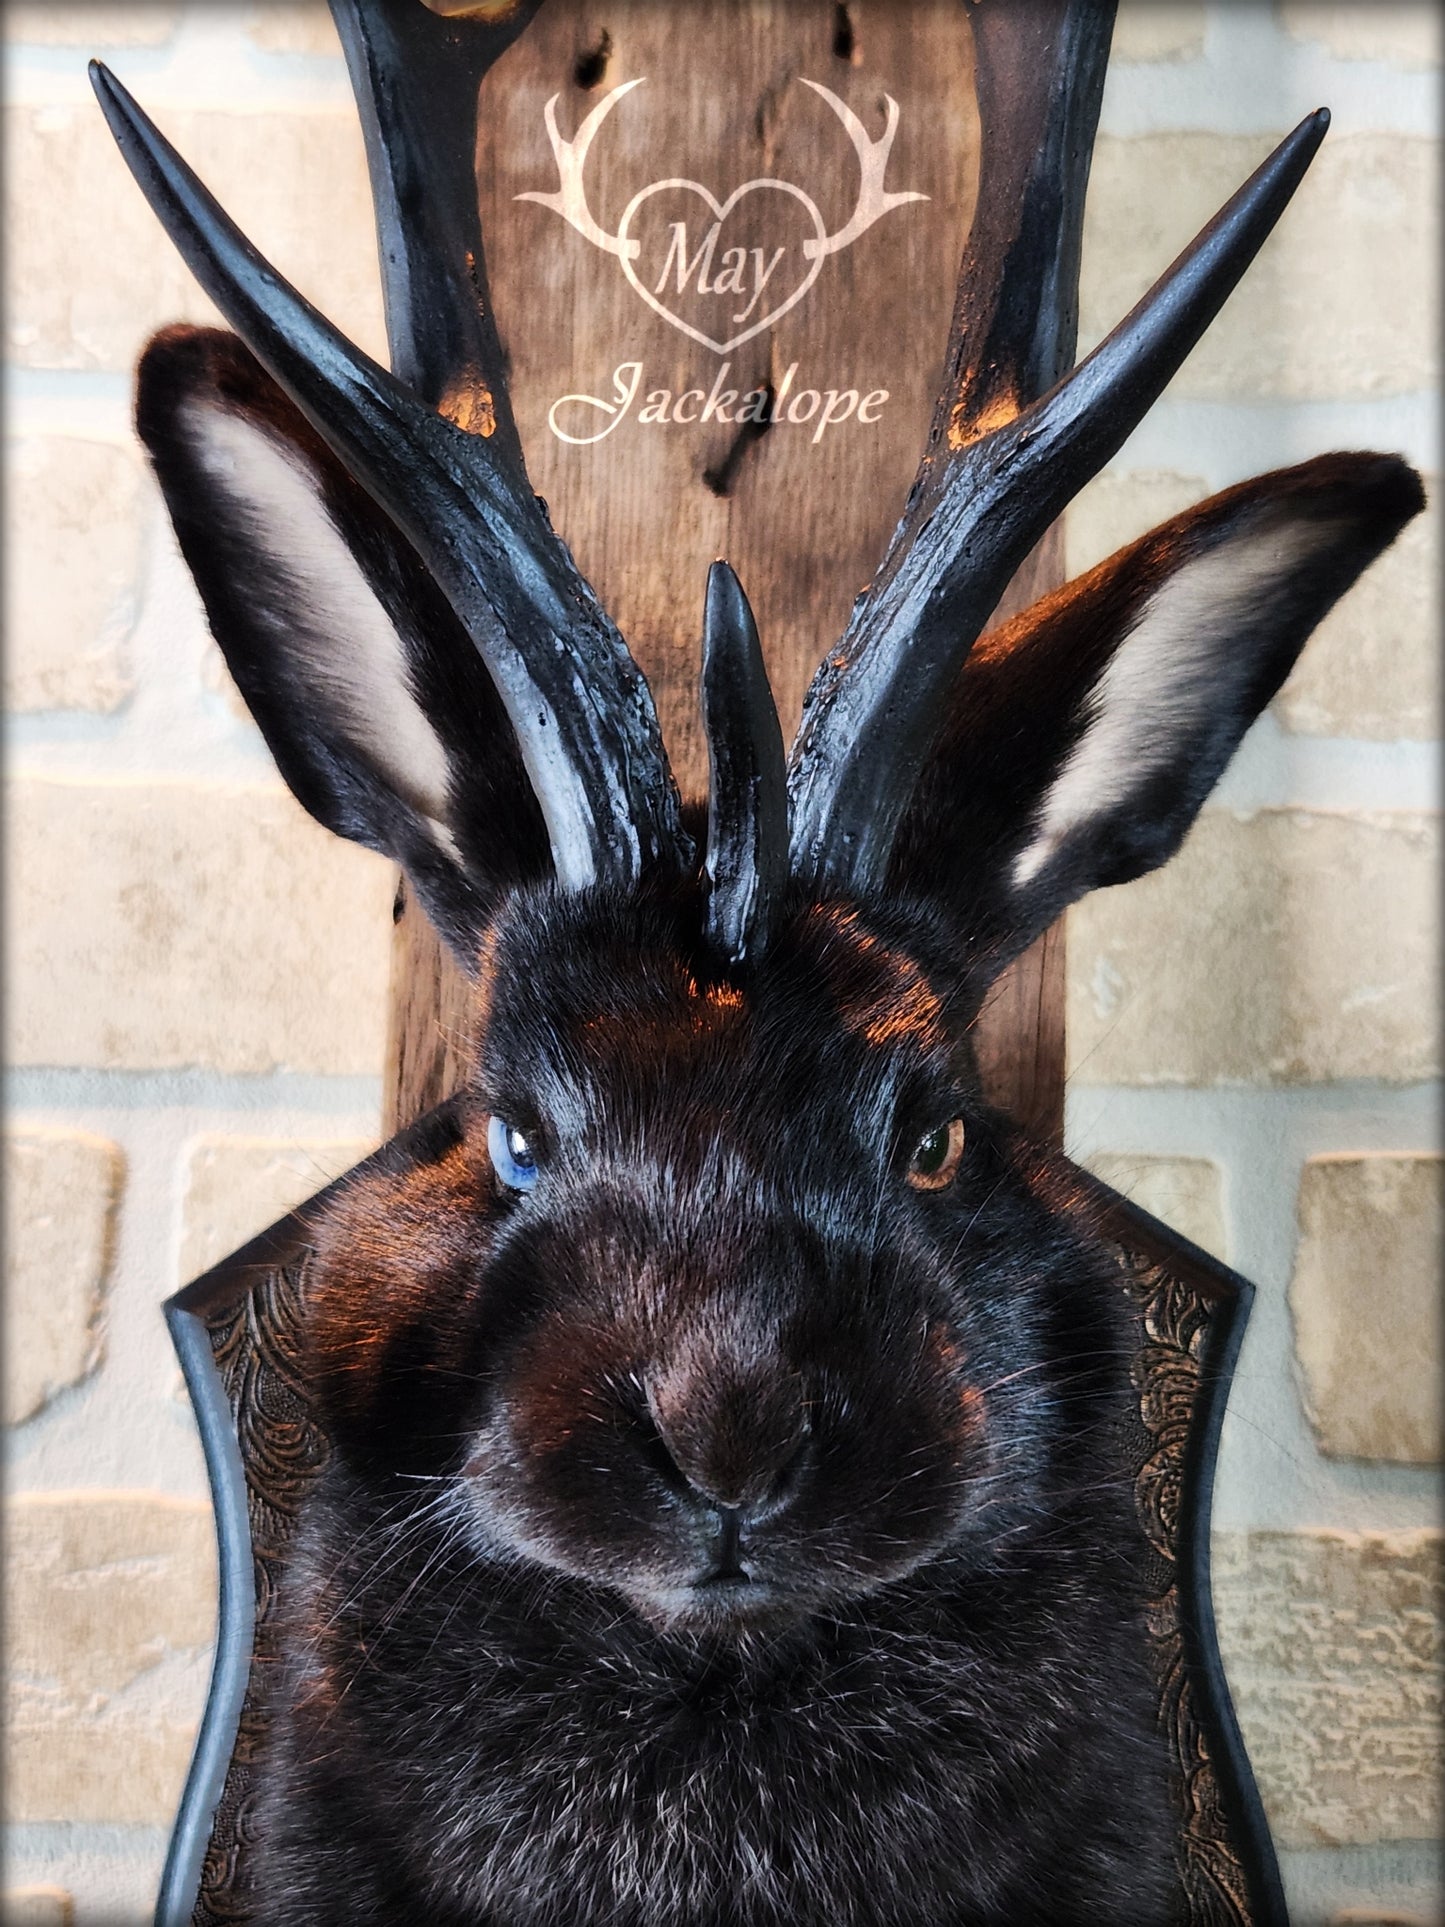 Black Jackalope taxidermy with black antlers replica, heterochromia eyes on a decorated plaque